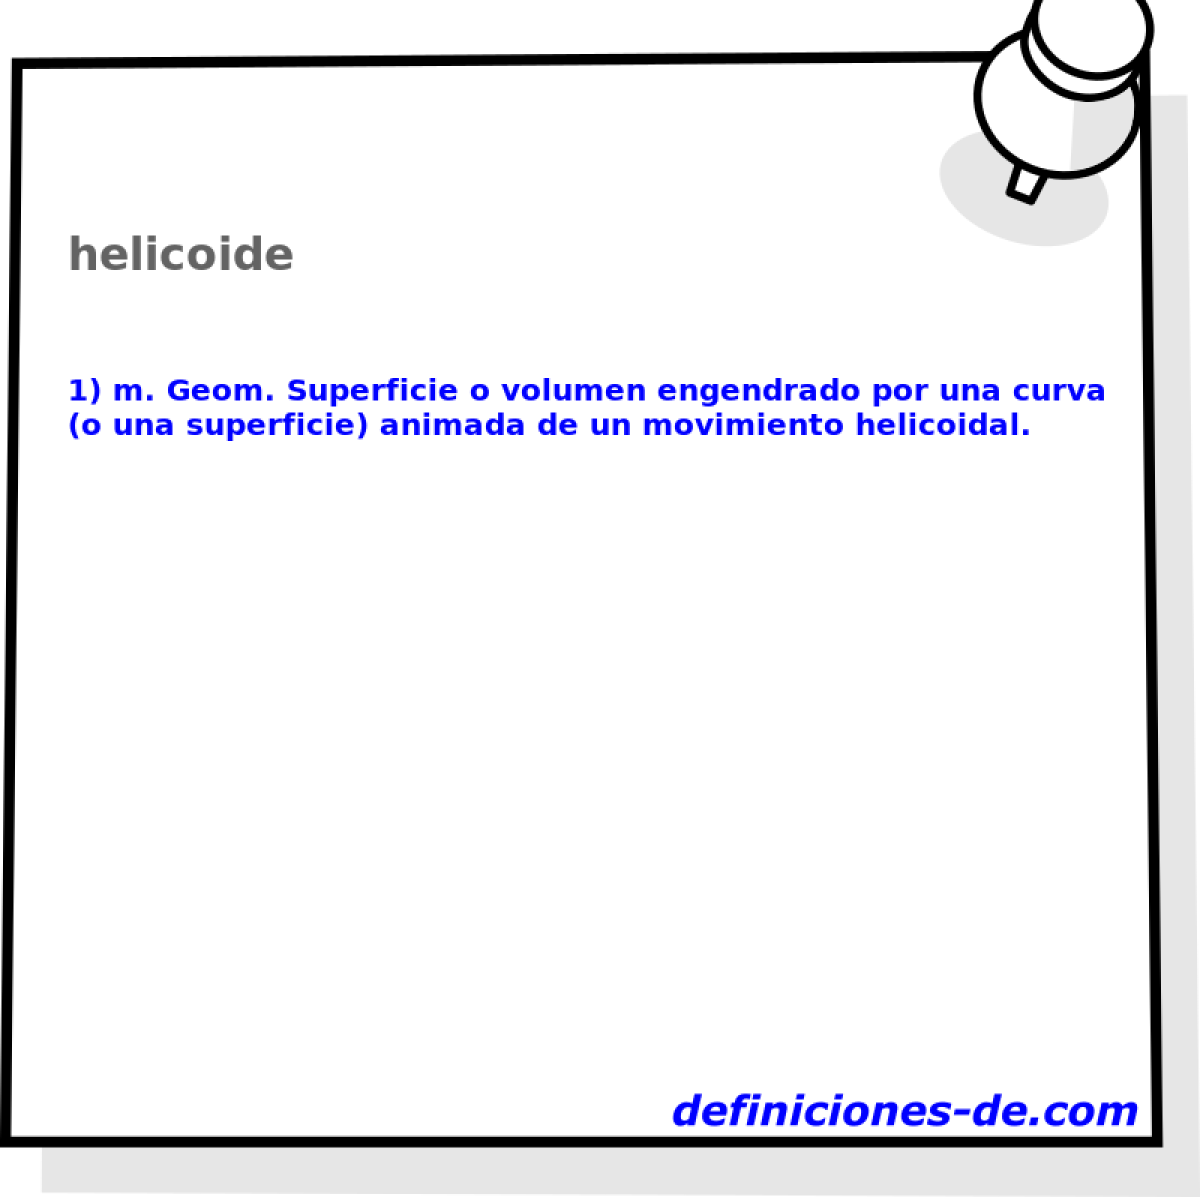 helicoide 